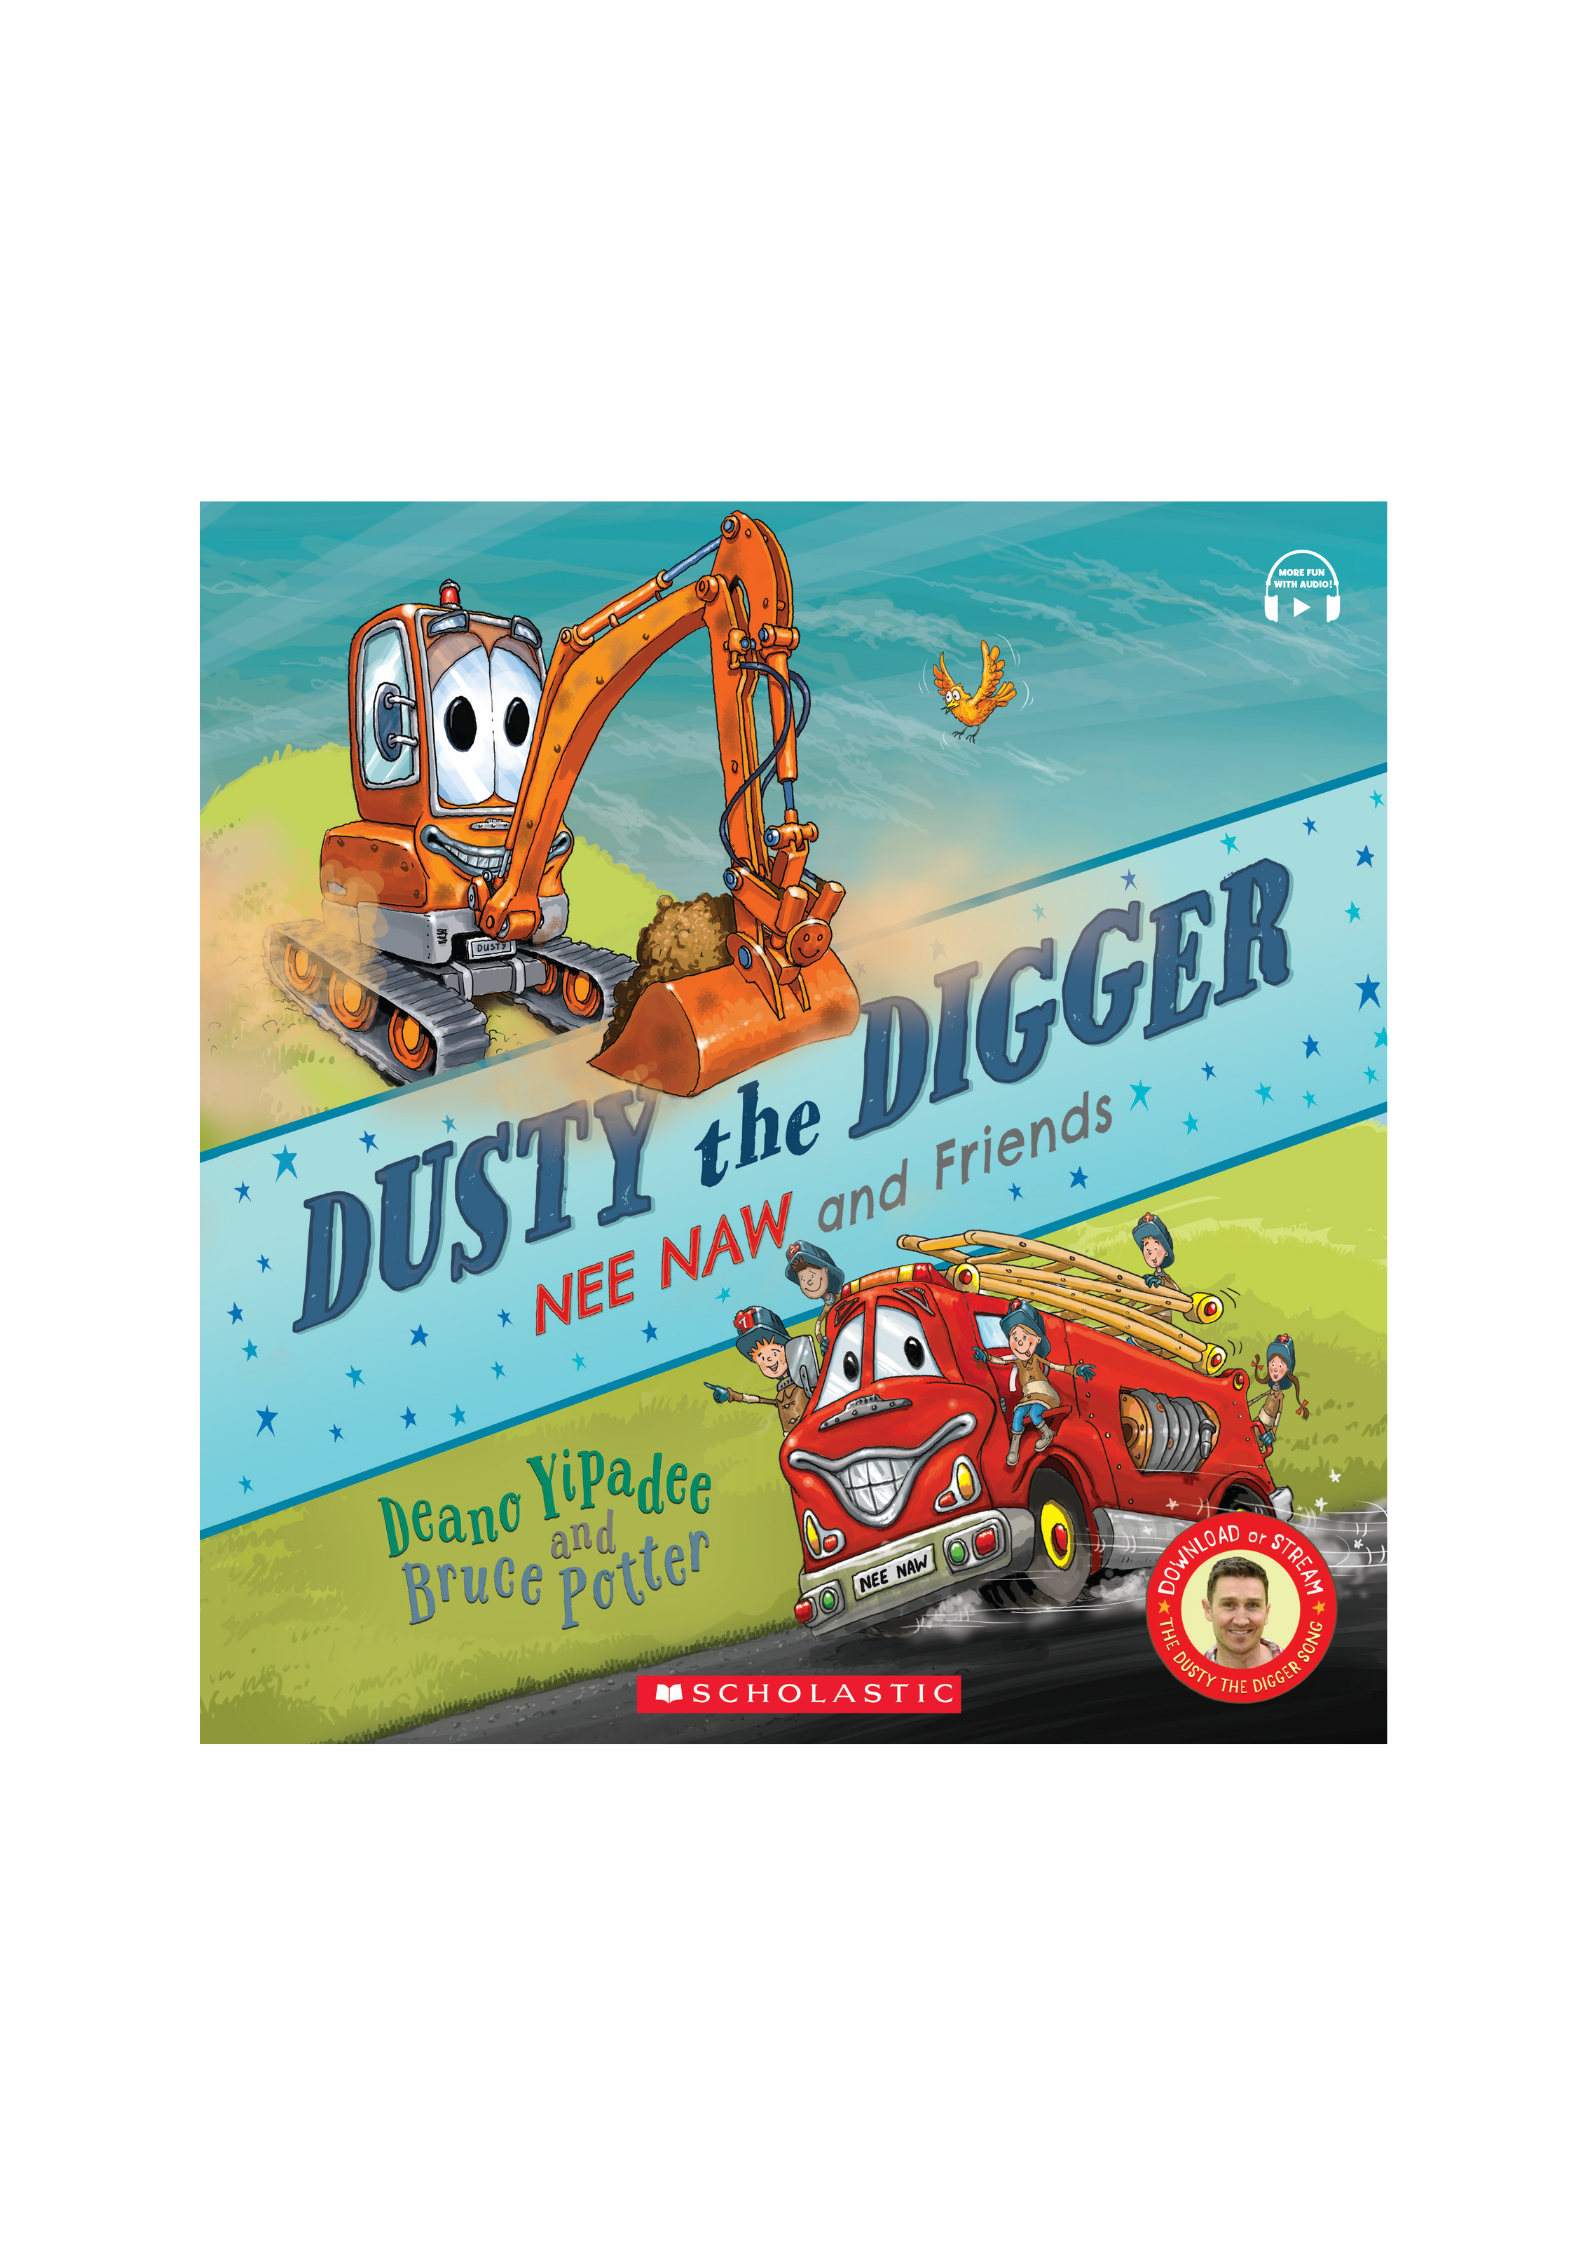 Dusty the Digger – Nee Naw and Friends